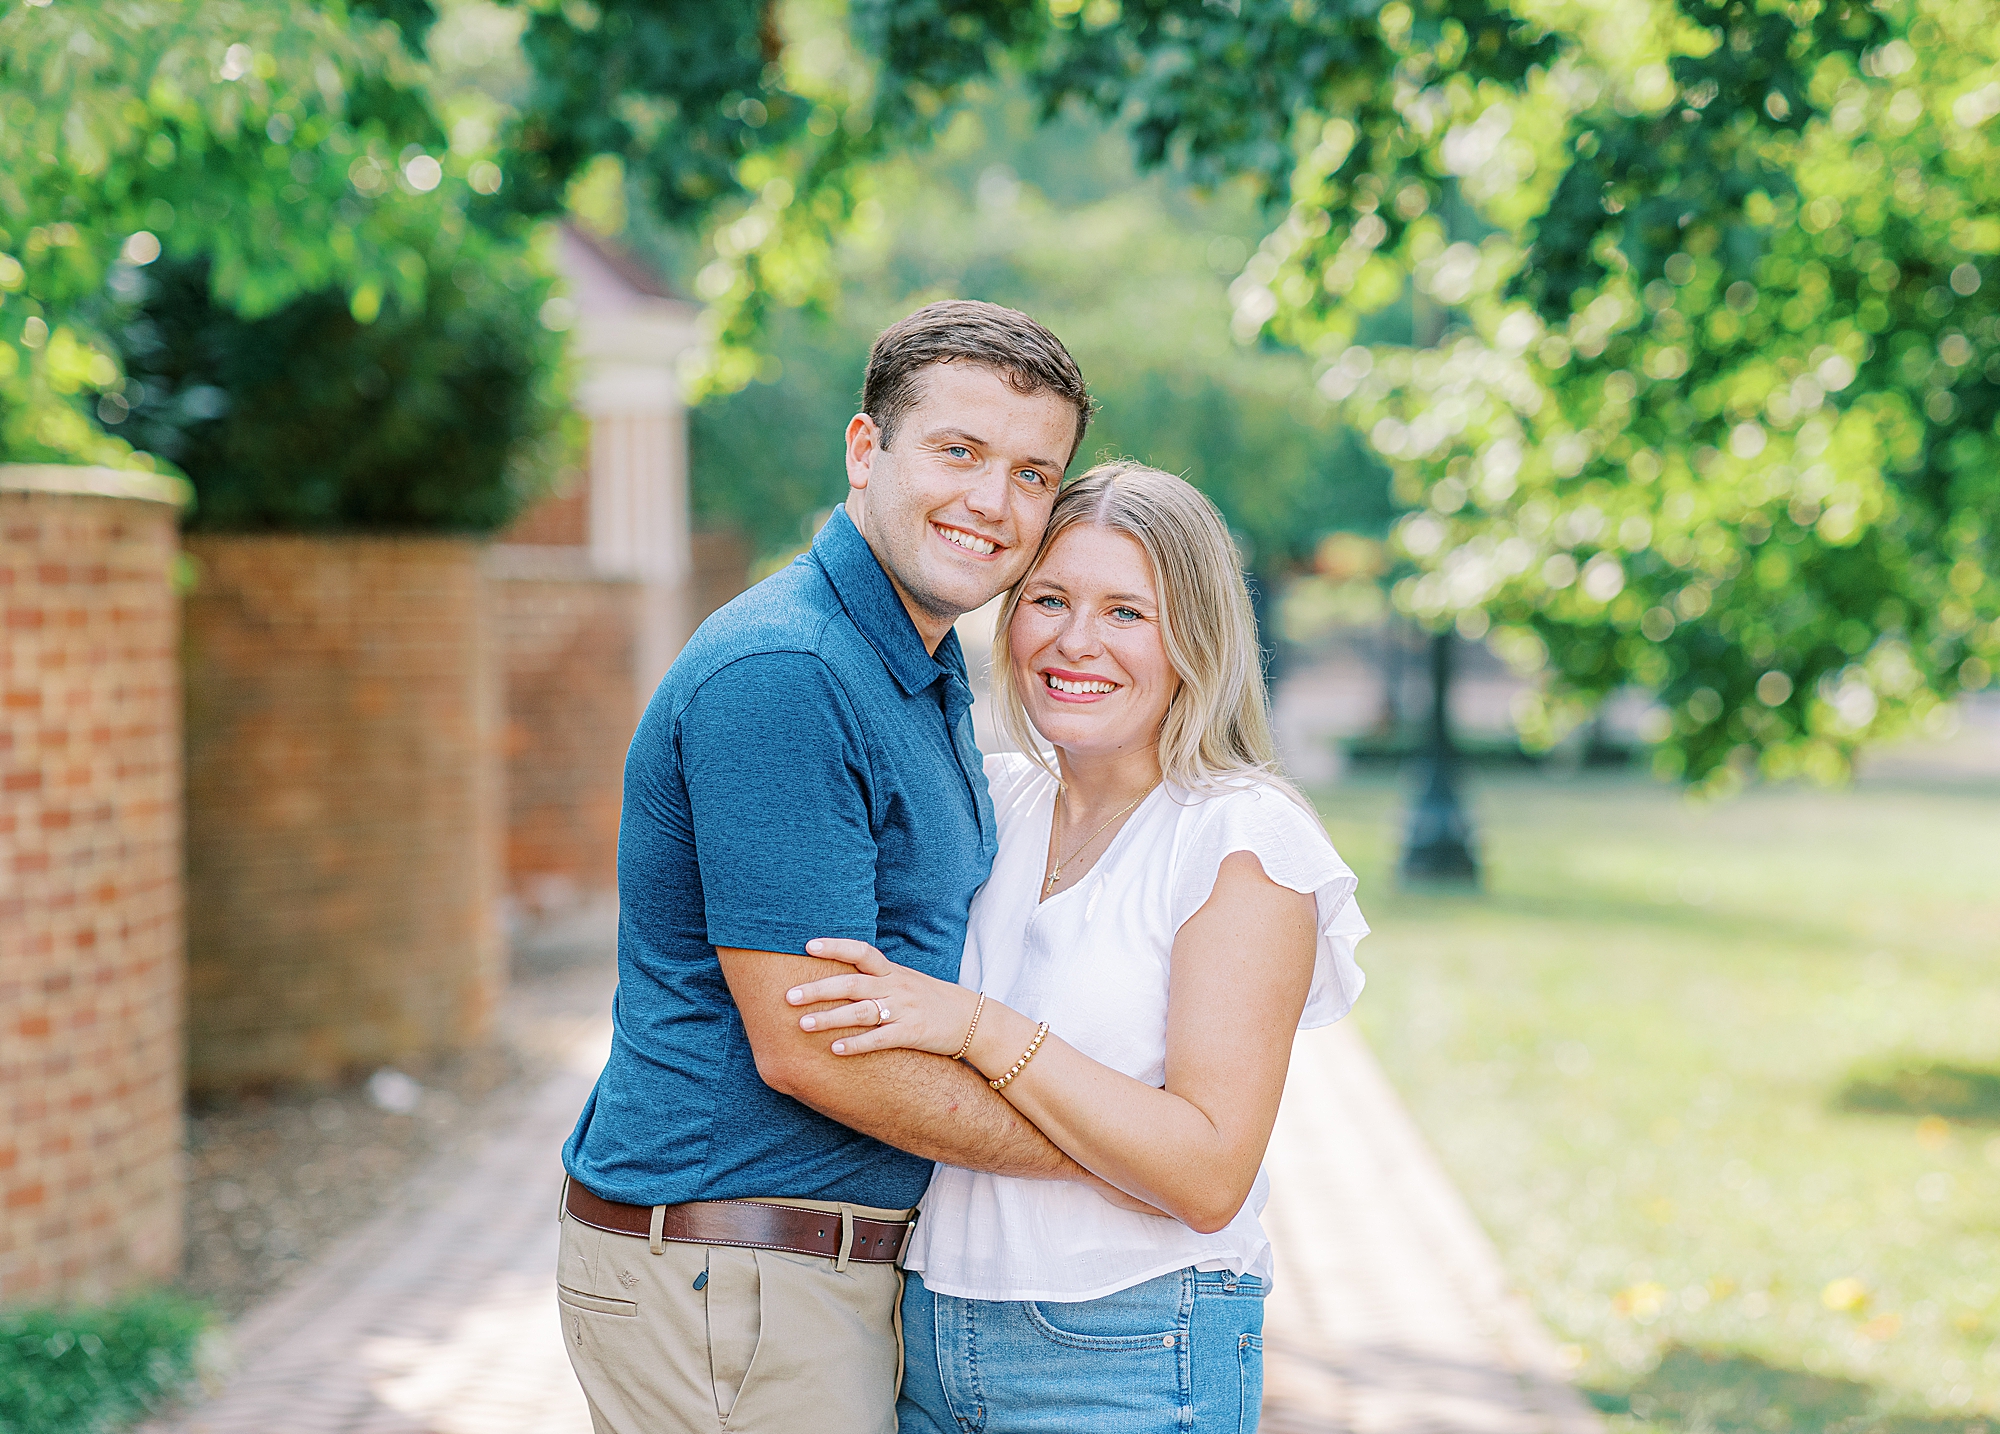 Ashley Eagleson Photography captures couple smiling at camera during summer engagement session.